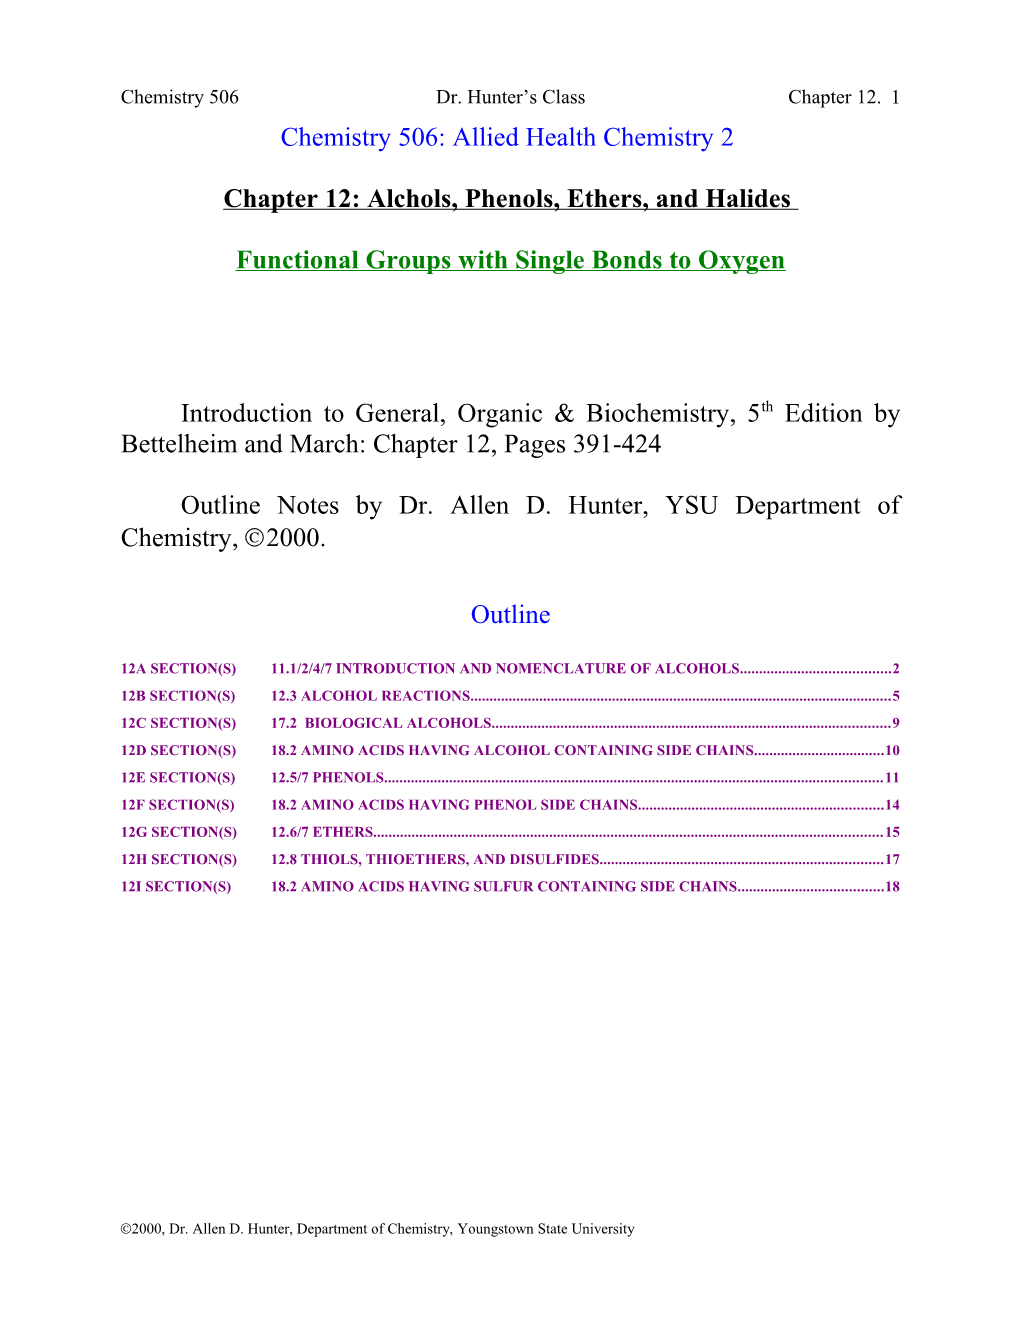 Chapter 12: Alchols, Phenols, Ethers, And Halides